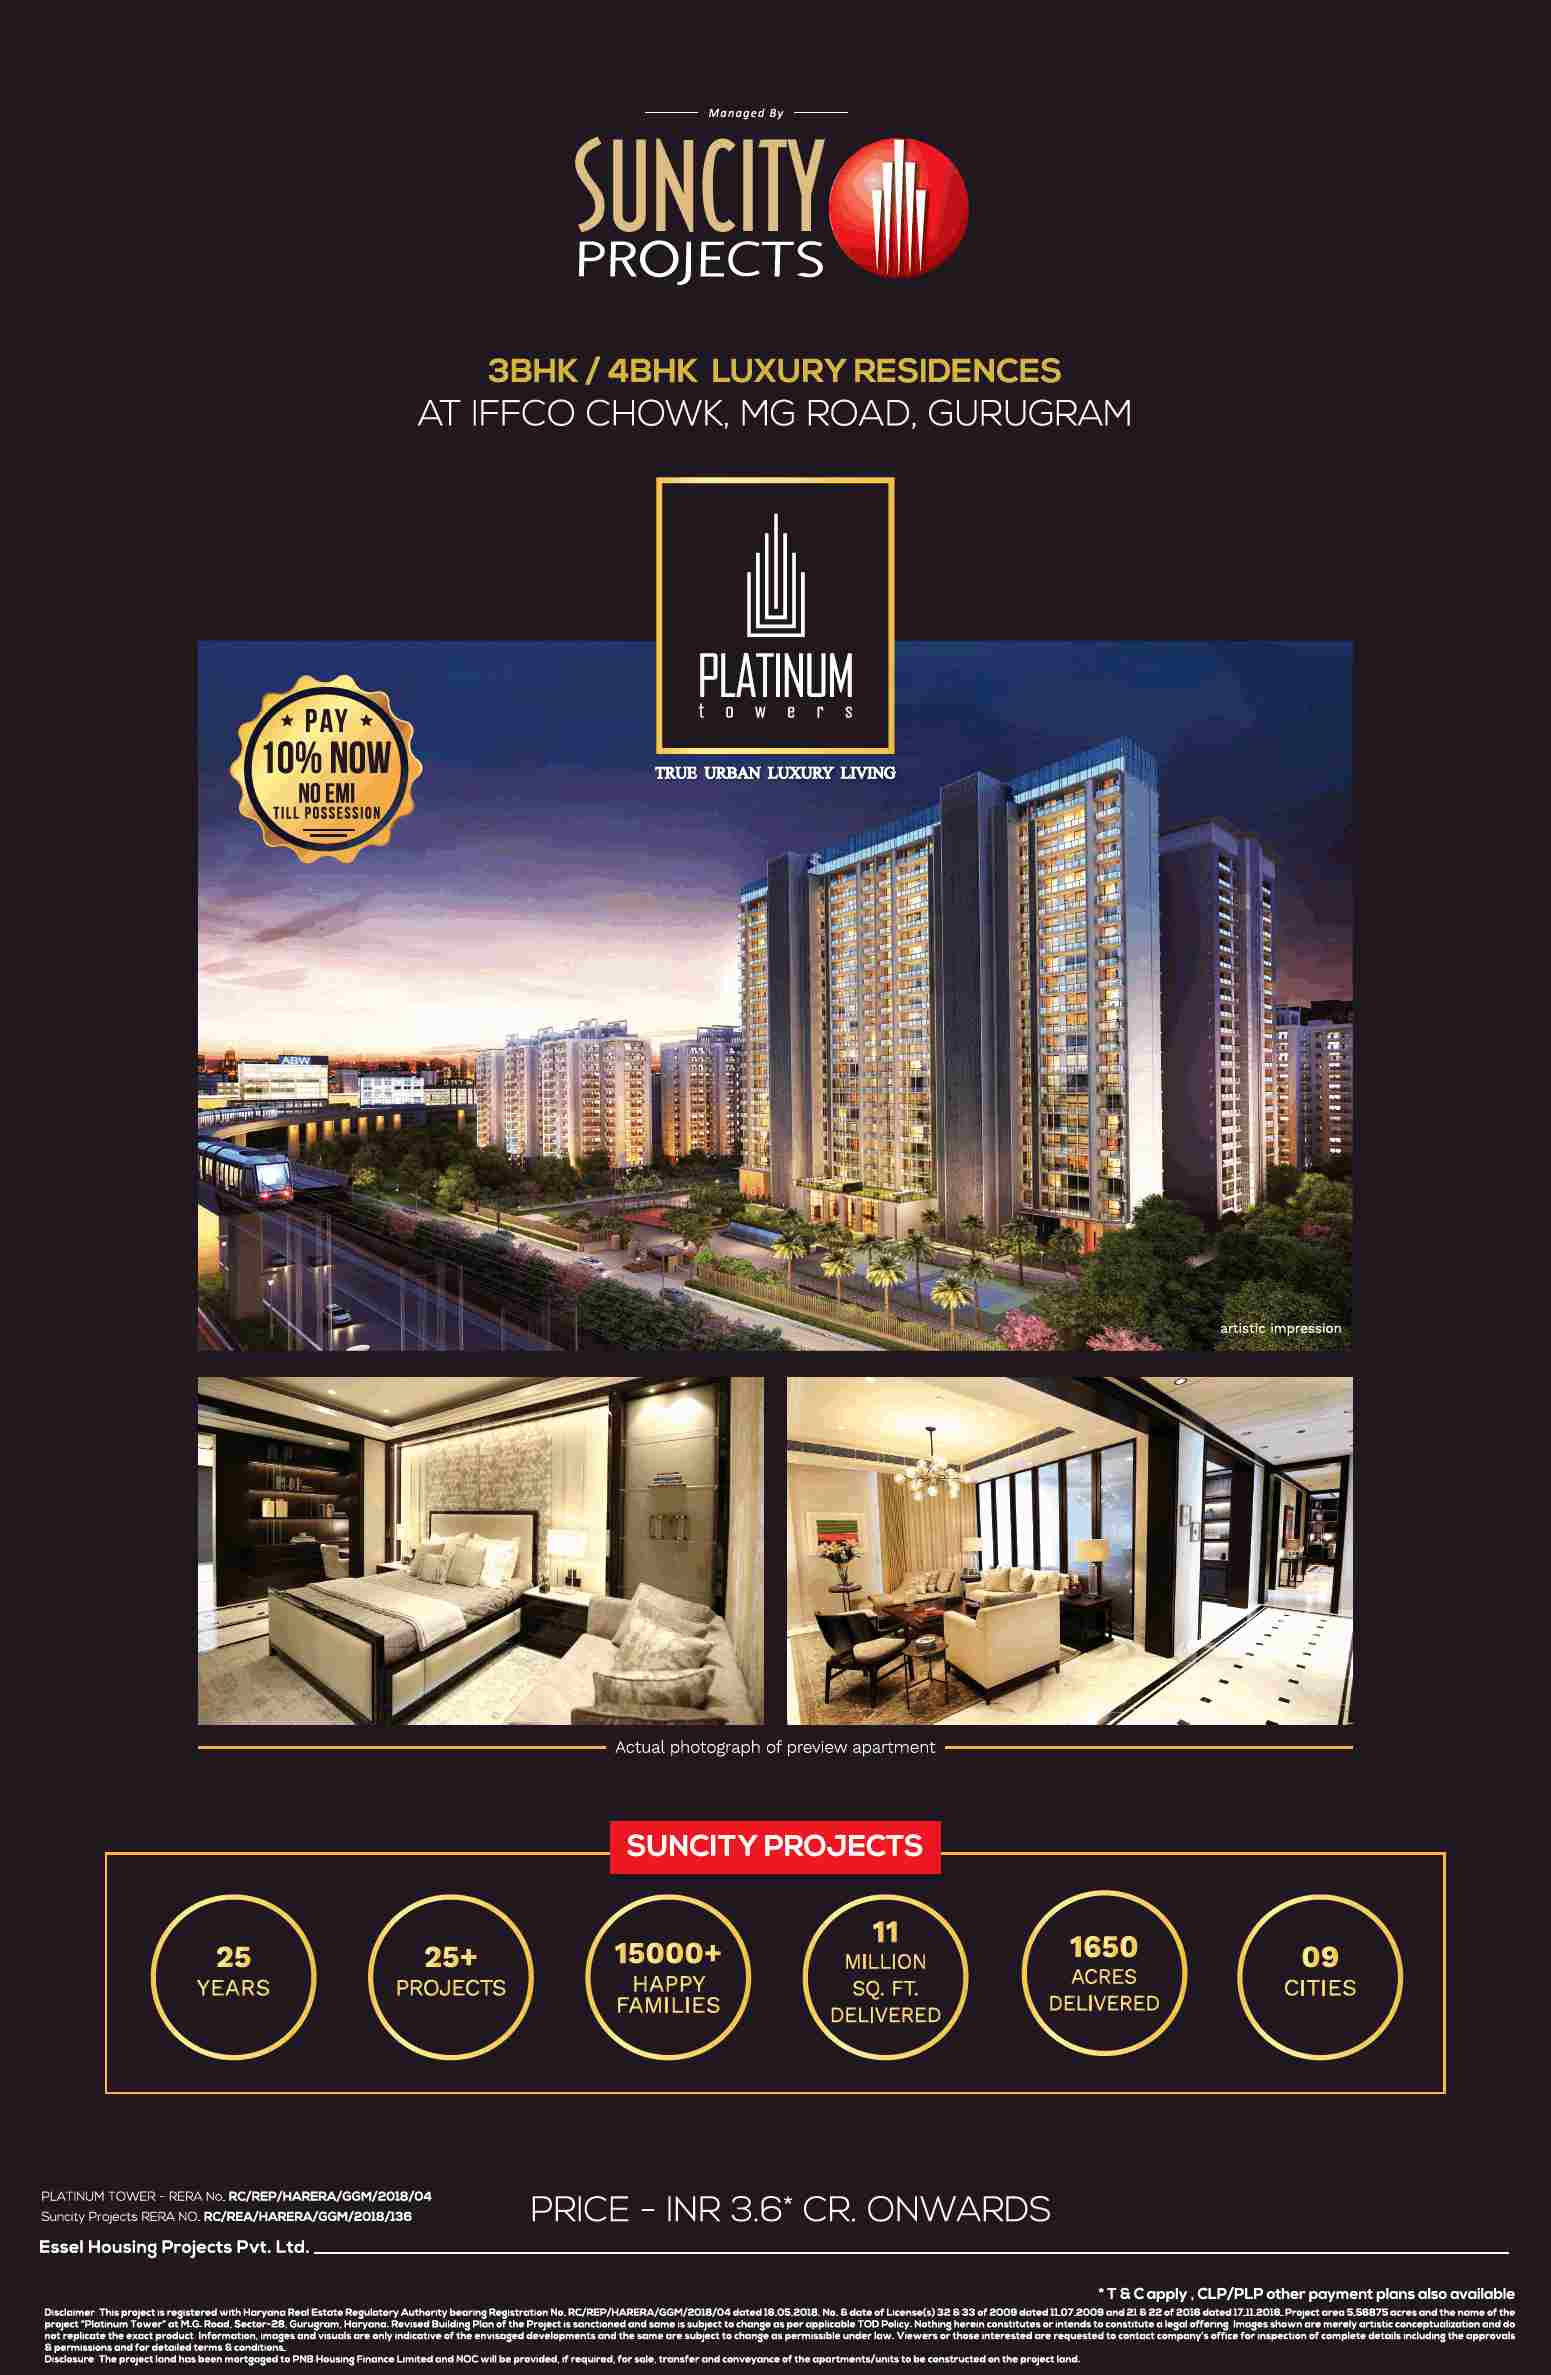 Book 3 & 4 BHK luxury residences @ Rs 3.6 cr at Suncity Platinum Towers in Gurgaon Update